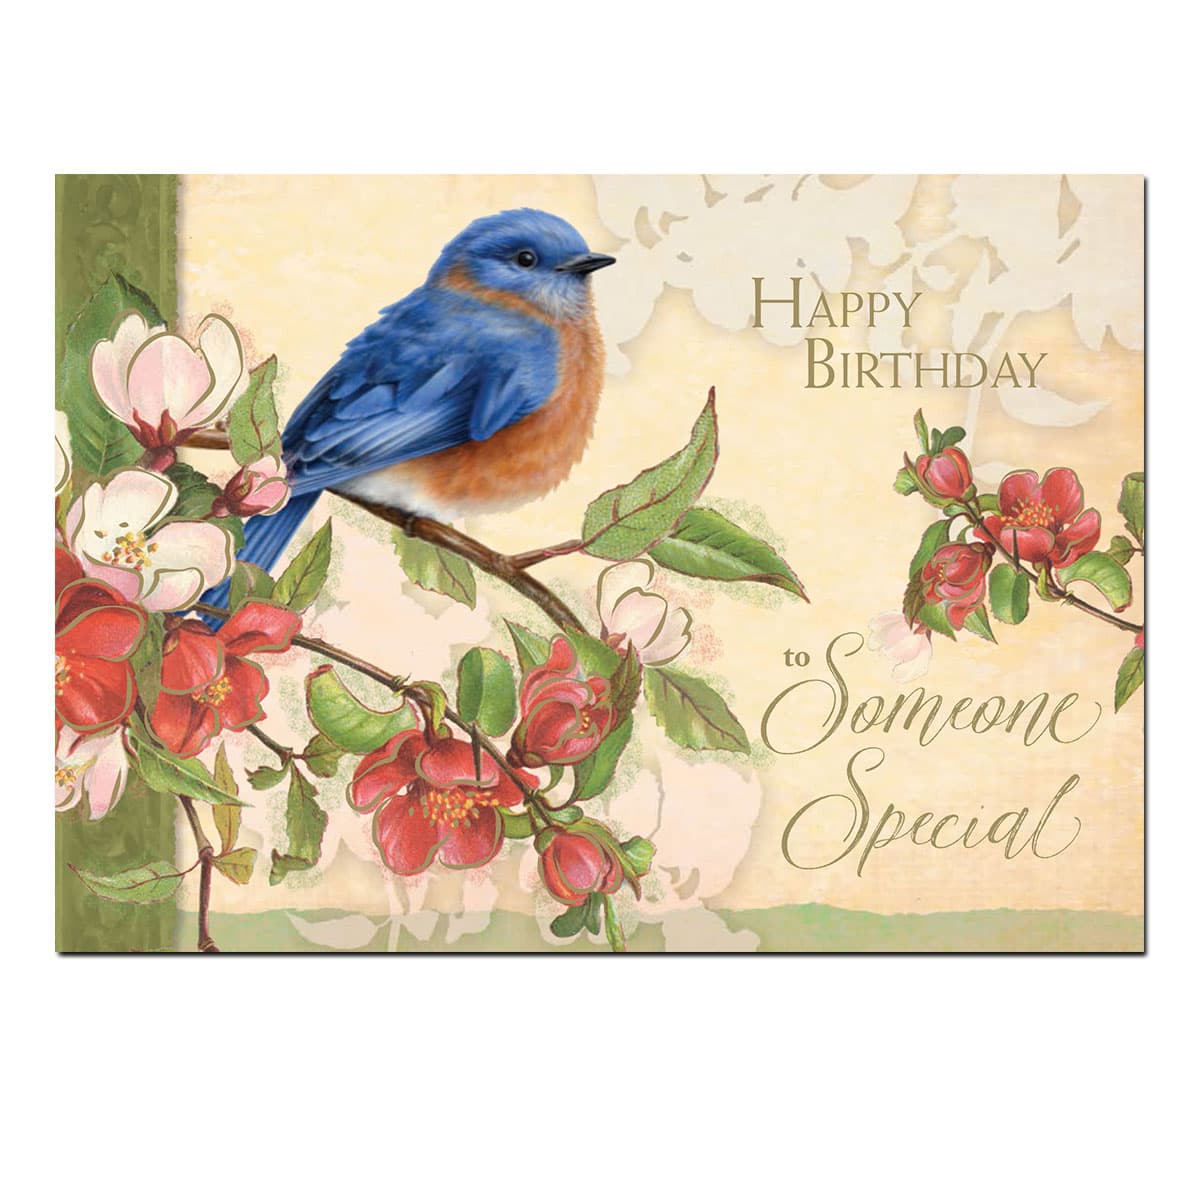 Someone Special Birthday Card #353 - Society of the Little Flower - US